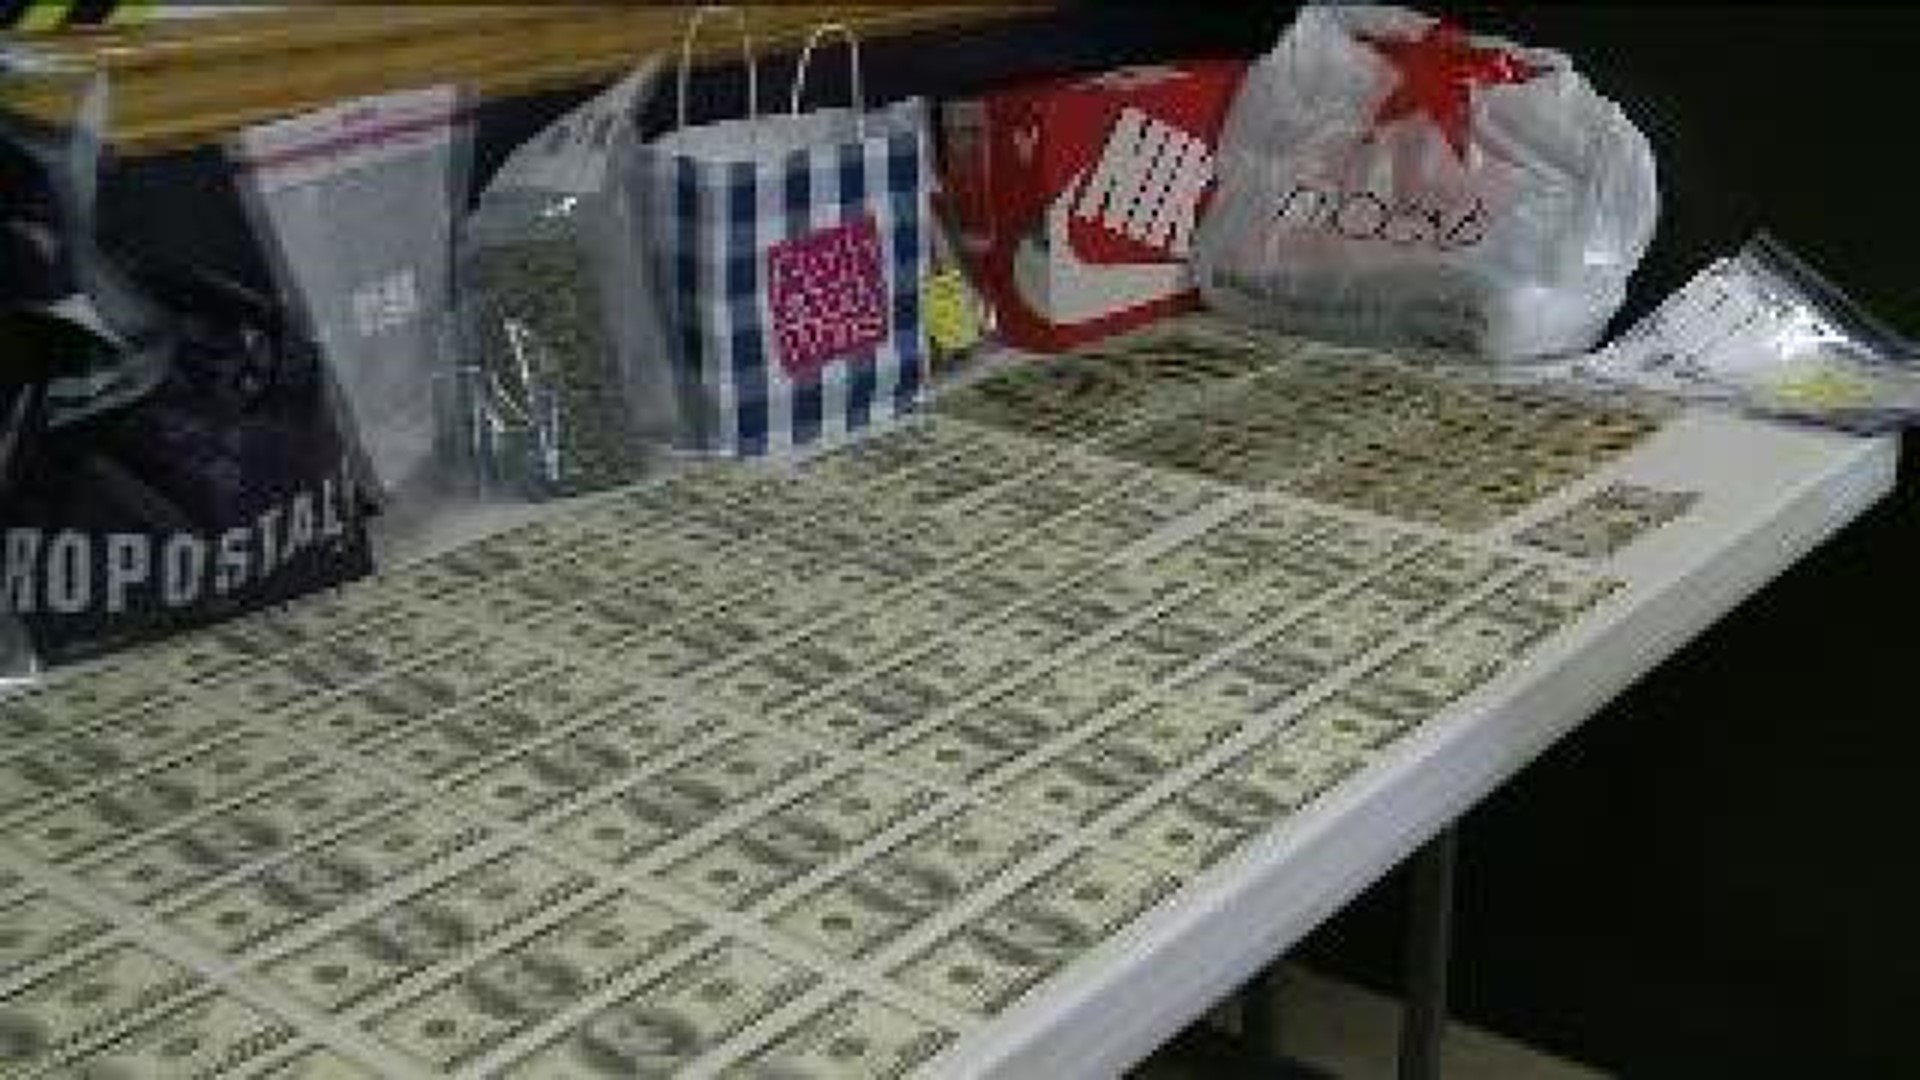 Two People In Jail After Using Fake Money At Shoppes At Montage